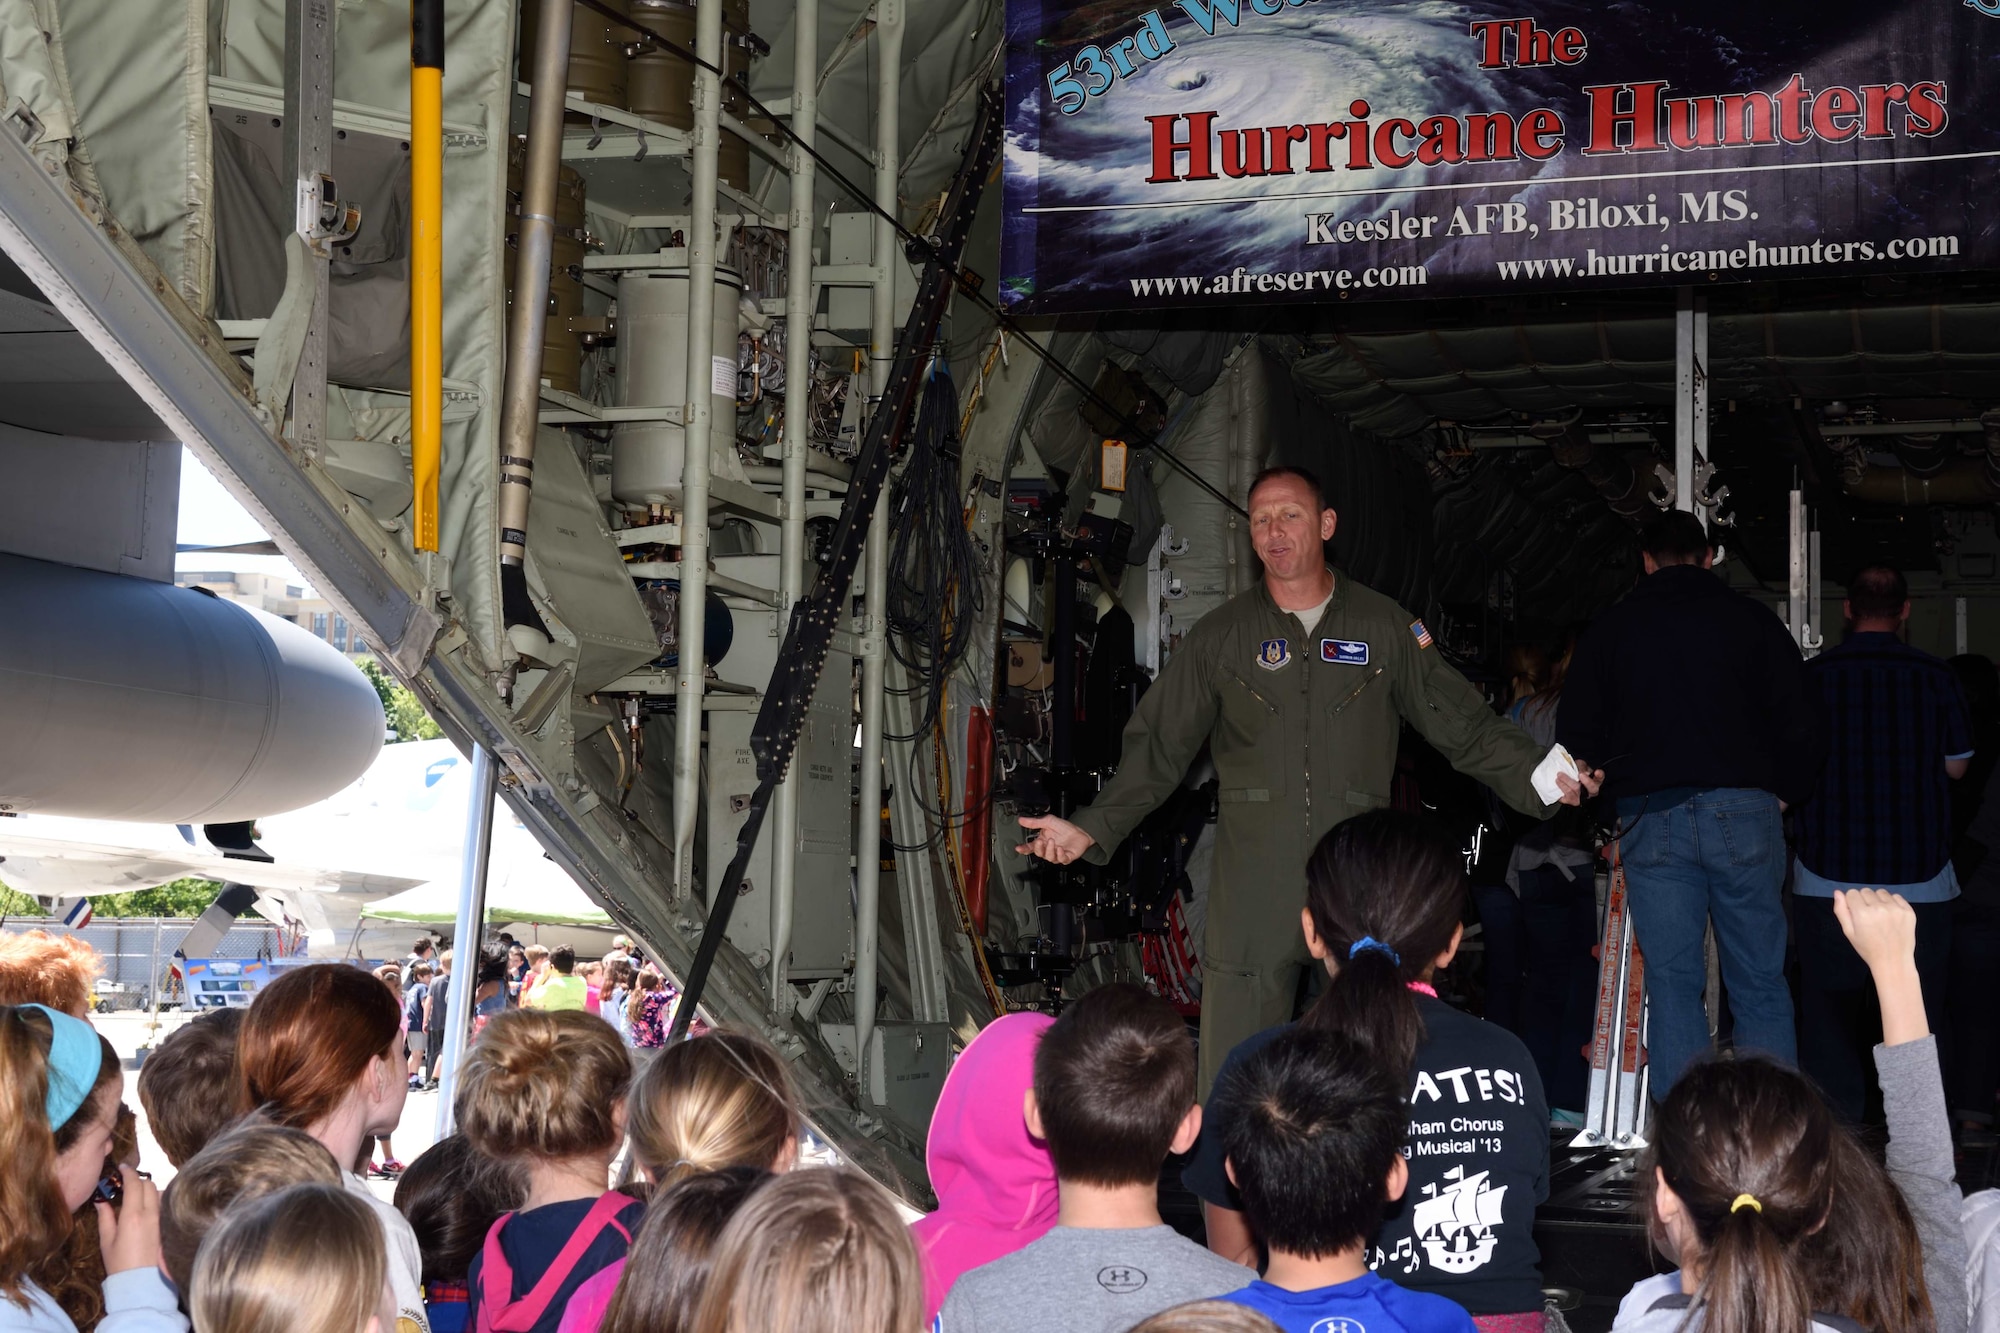 Lt. Col. Shannon Hailes, 53rd Weather Reconnaissance Squadron instructor pilot, talks to members of the public about the capabilities of the squadron’s WC-130J Hercules aircraft in Arlington, Virginia, during the 2017 Hurricane Awareness Tour May 9, 2017. The purpose of the tour, which ran from May 6-12, 2017, was to focus attention on the approaching hurricane season and on protecting communities through preparedness and awareness. (U.S. Air Force photo/Tech. Sgt. Ryan Labadens)